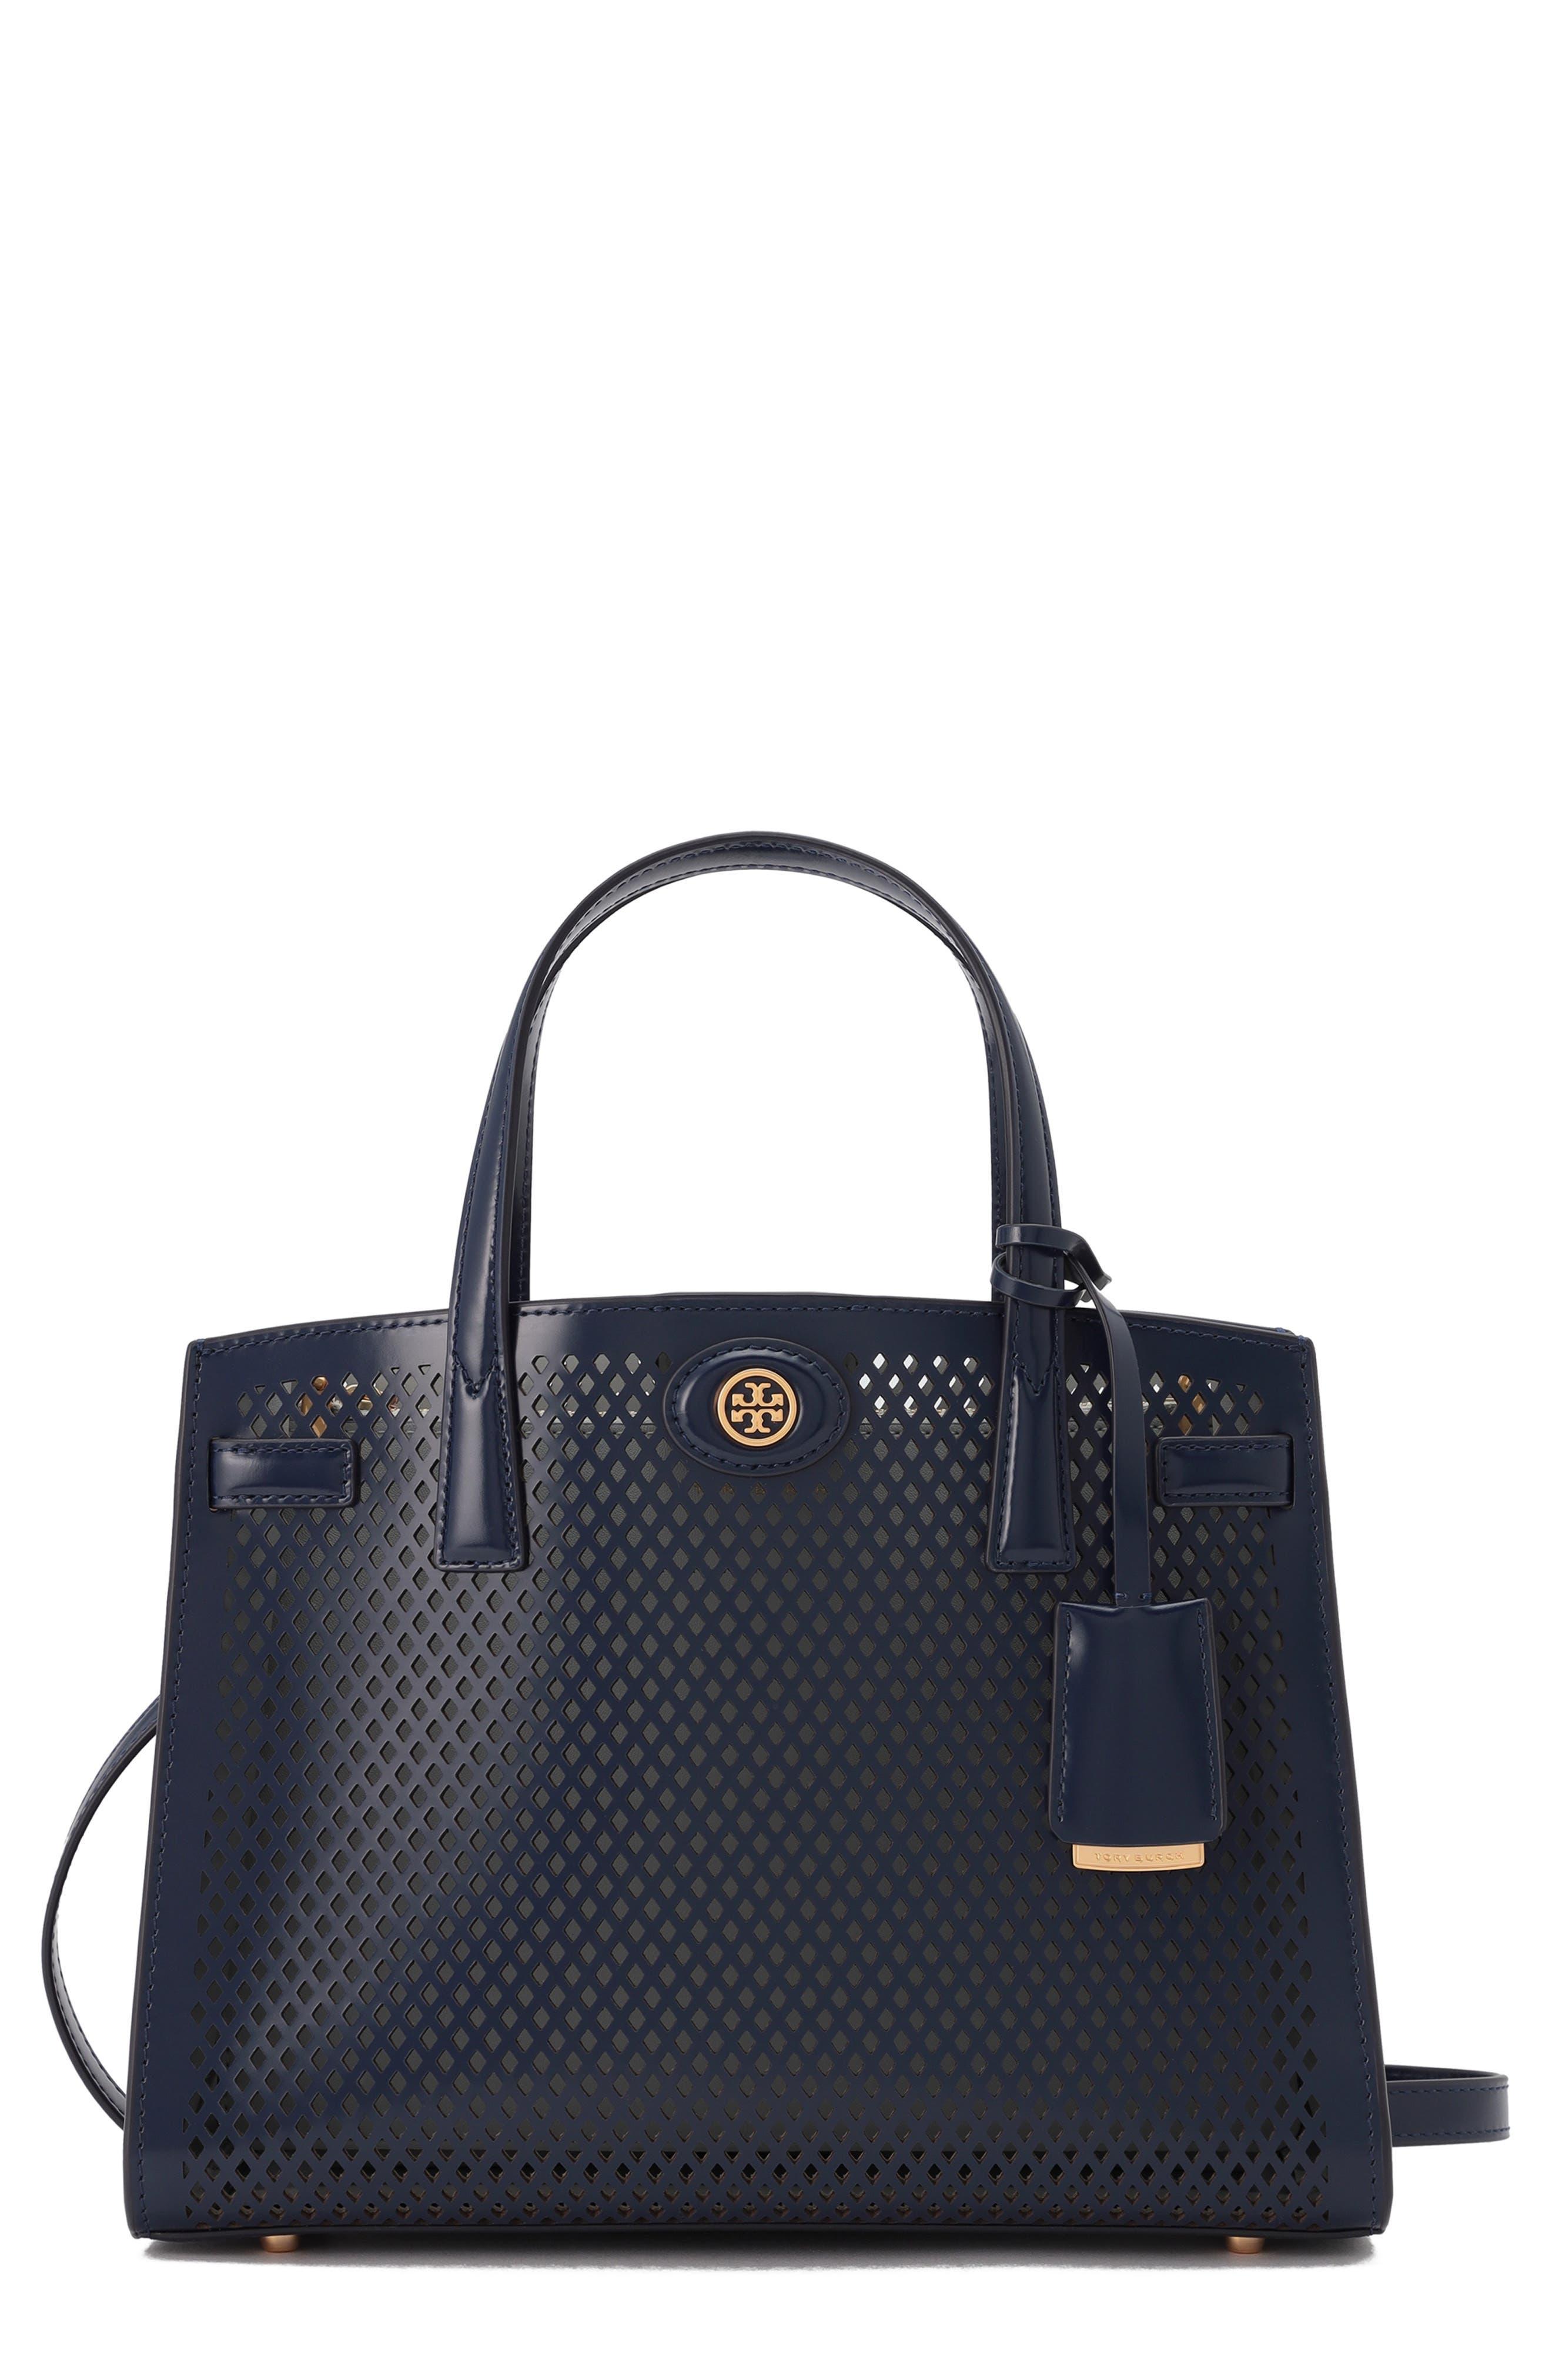 Tory Burch Robinson Perforated Small Satchel